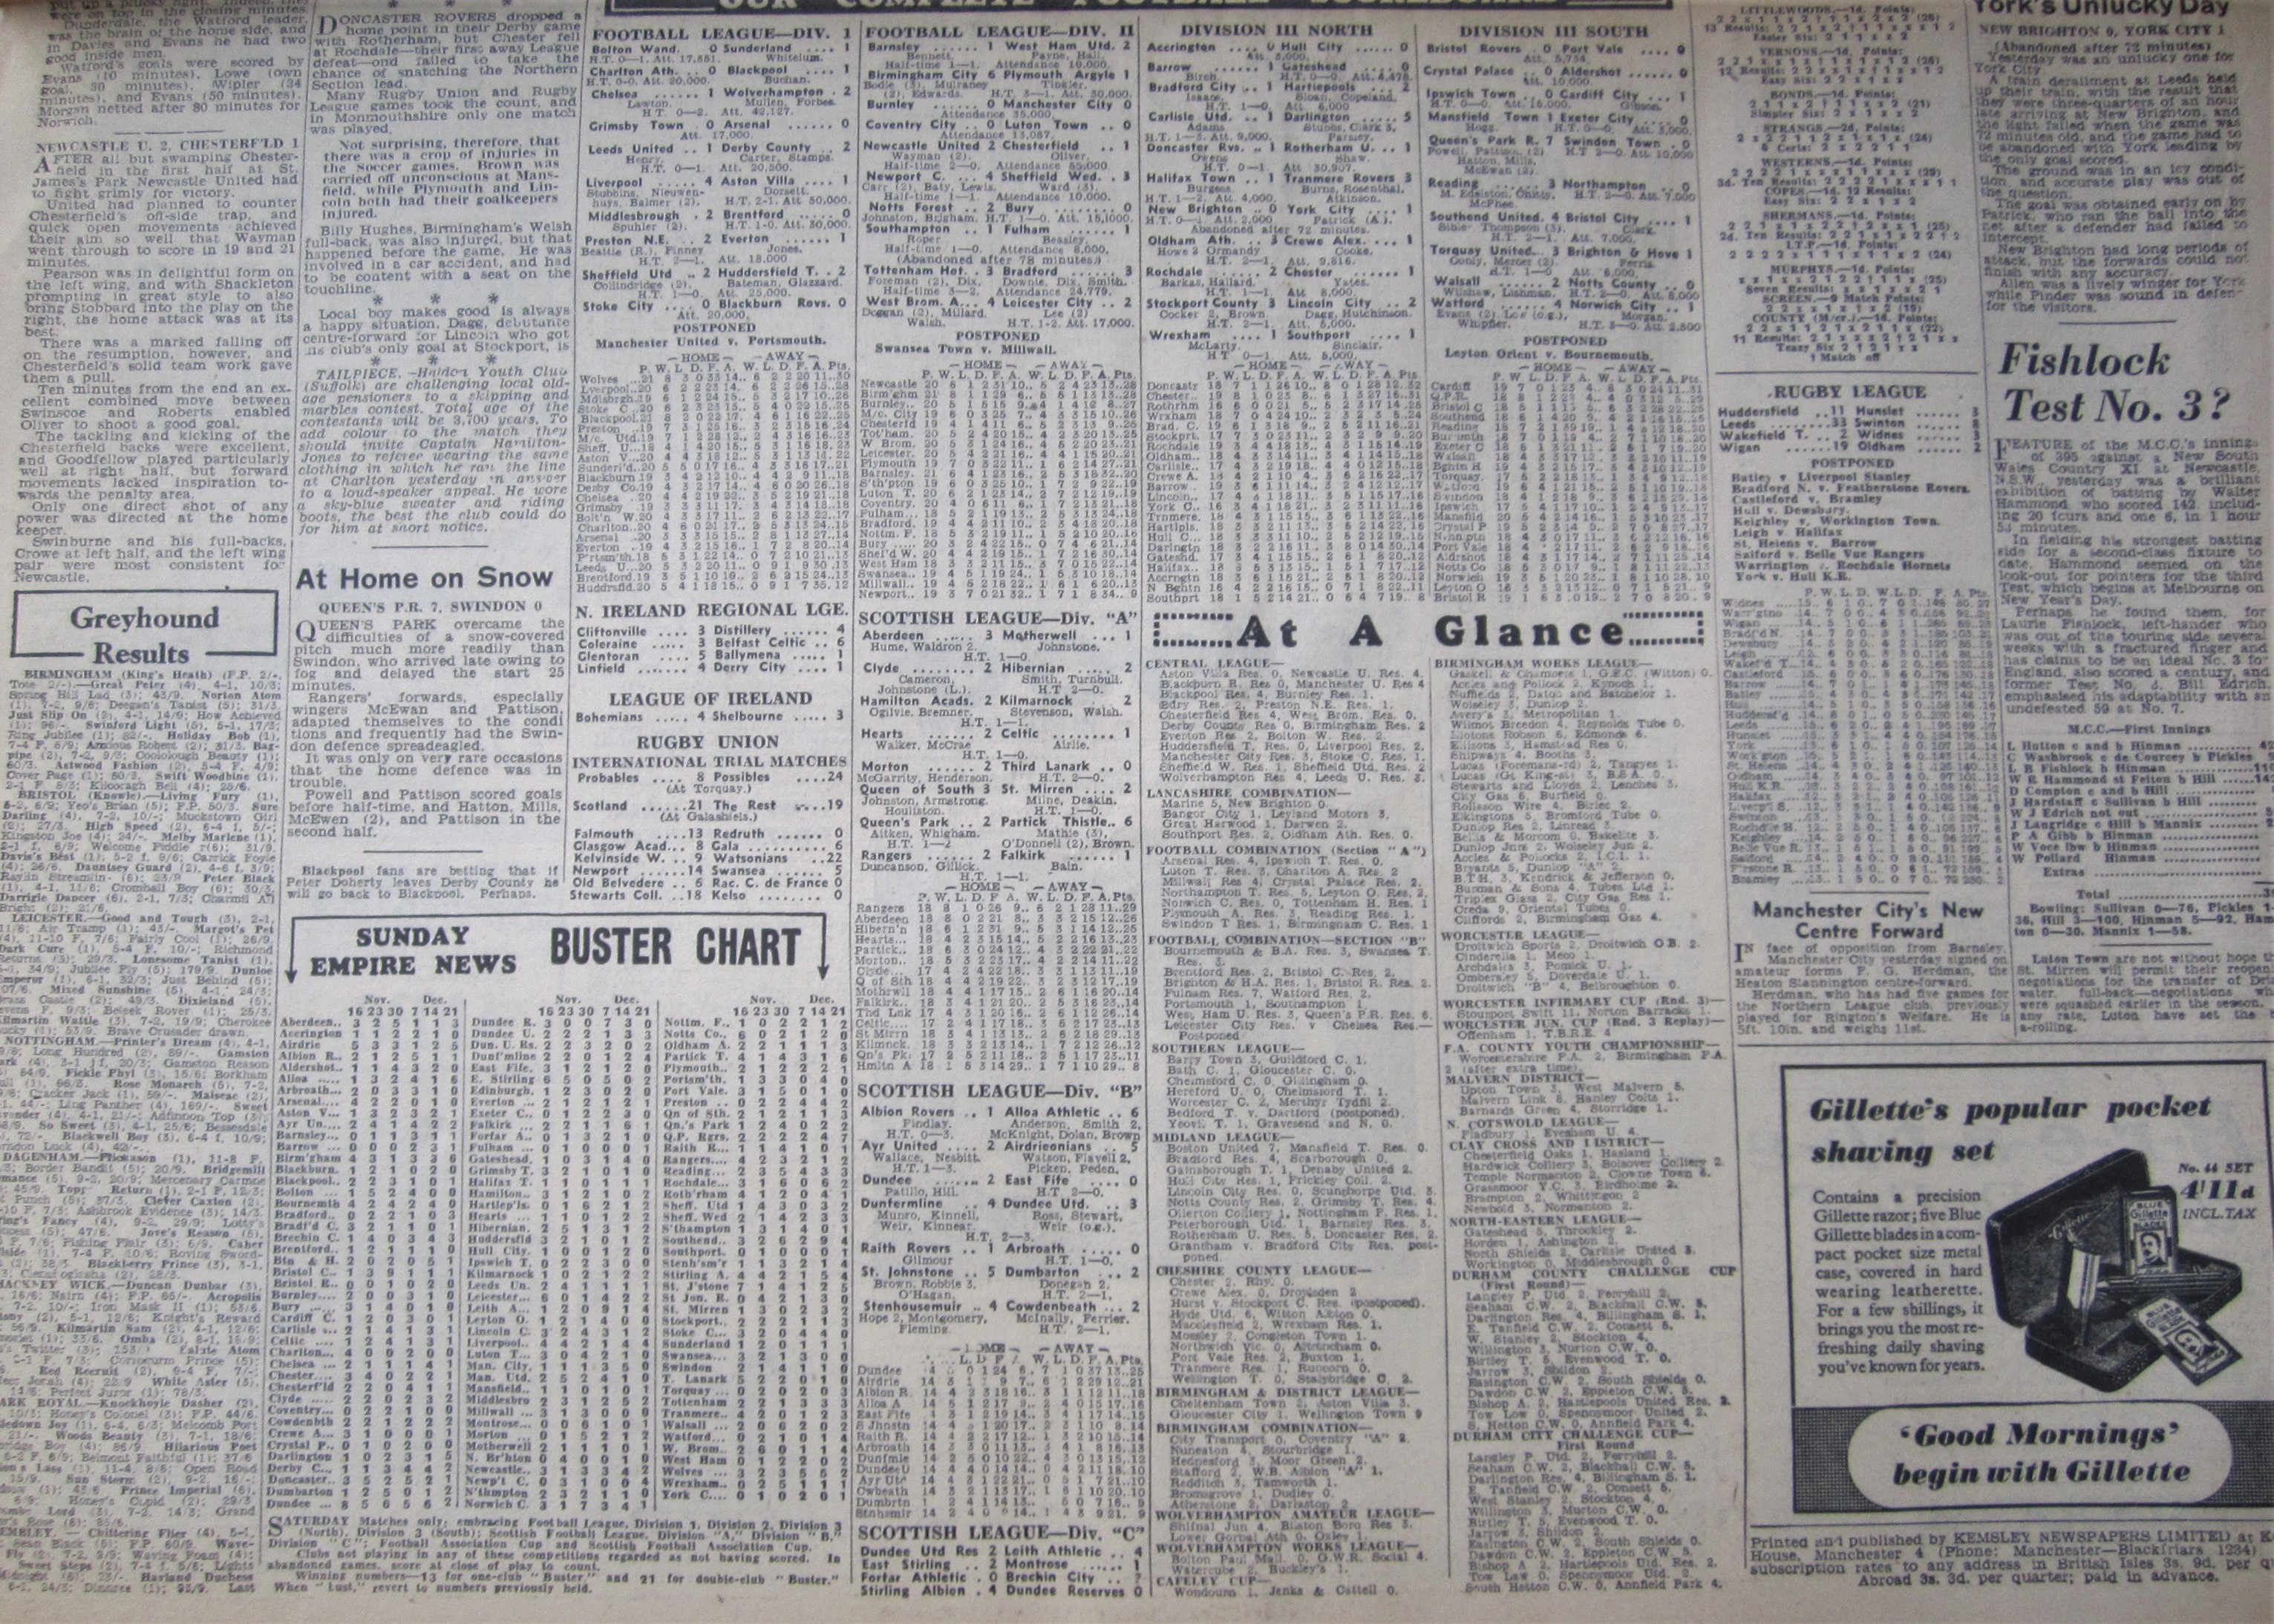 1946 WEST BROM LEICESTER BIRMINGHAM NEWCASTLE LIVERPOOL VILLA CHESTERFIELD PLYMOUTH BOXING - Image 2 of 3